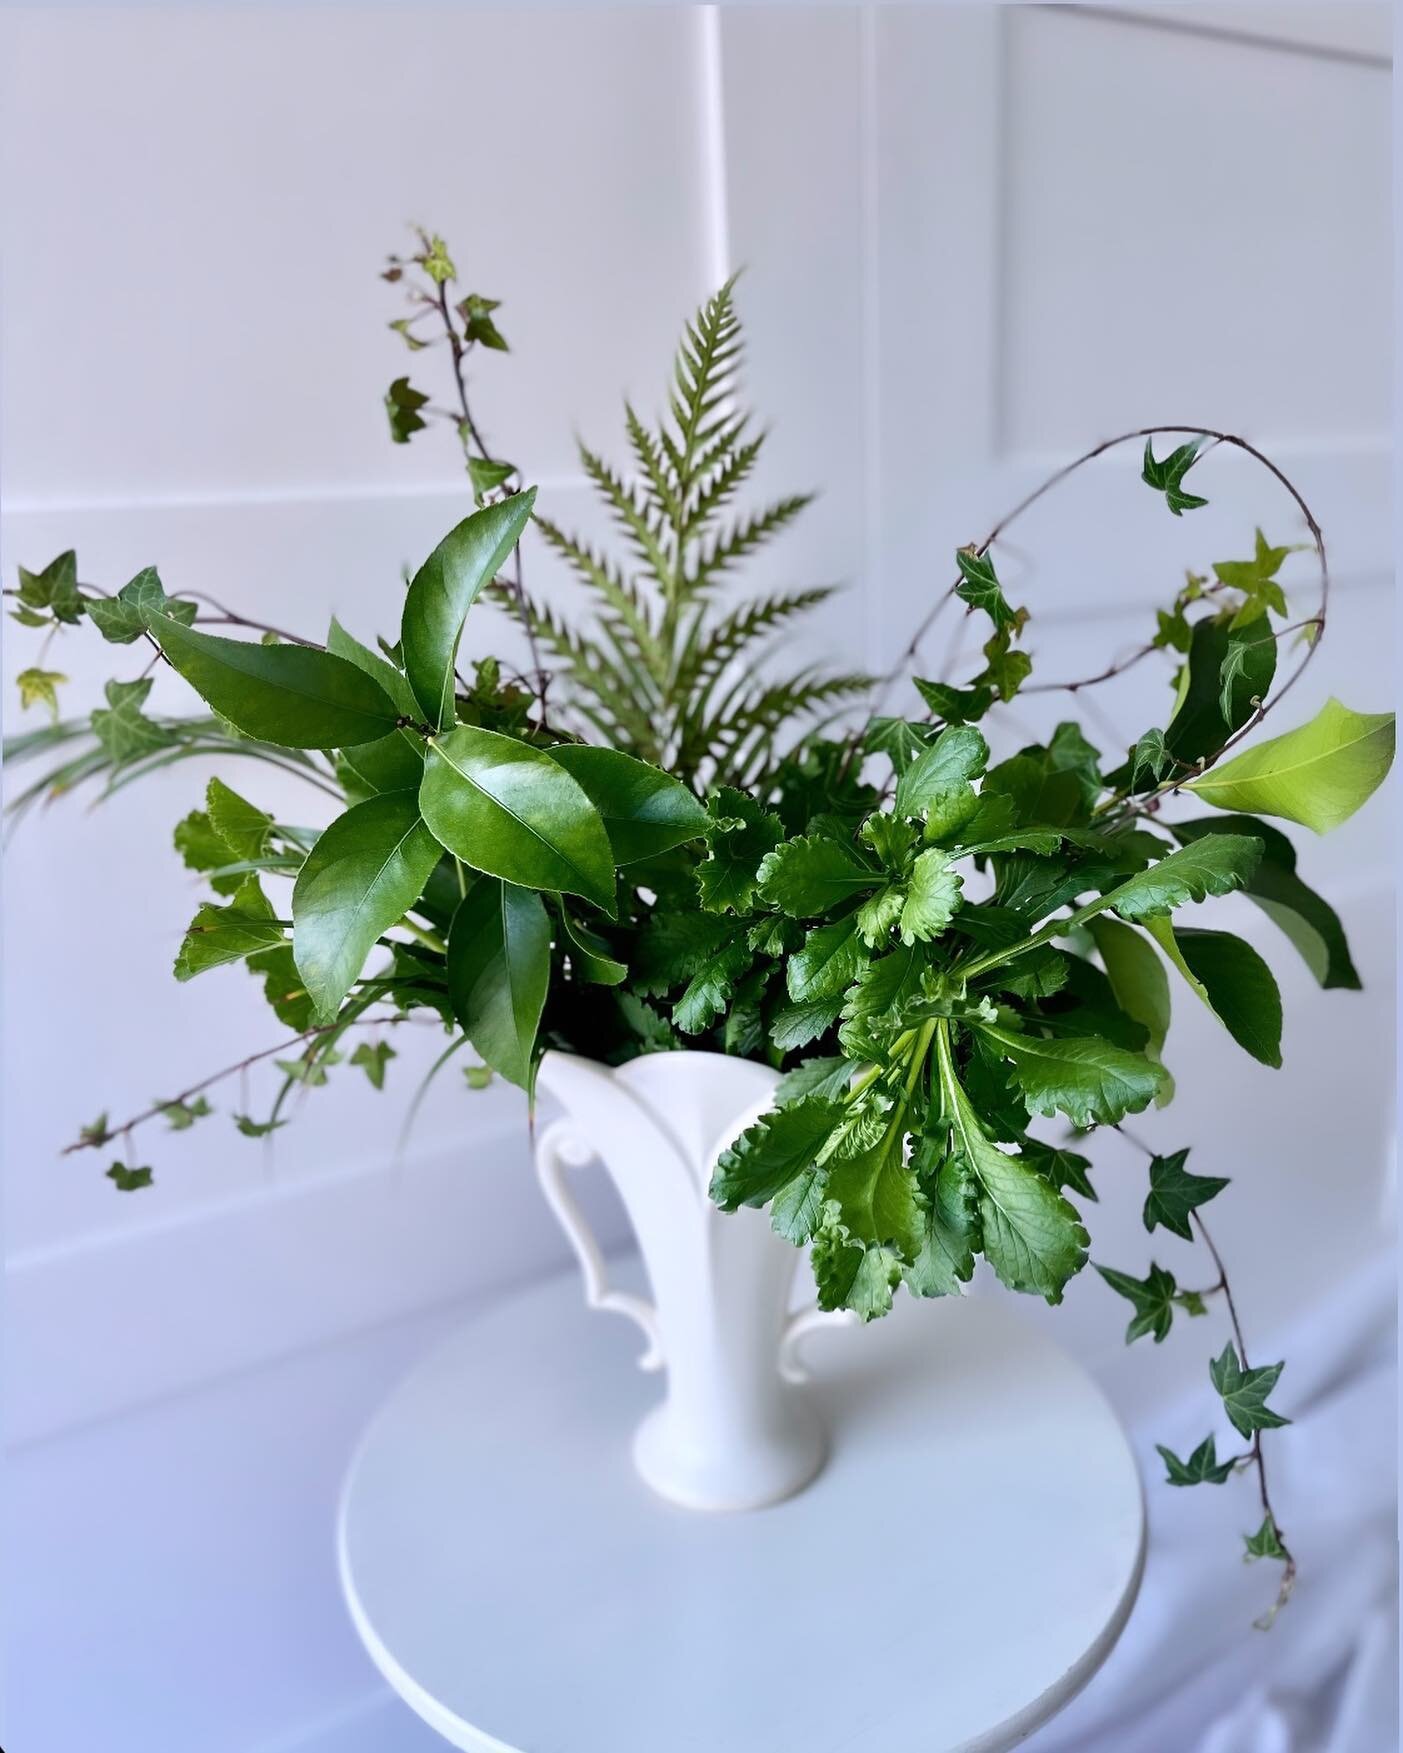 Ready for 𝑀𝐴𝑅𝐶𝐻 in all of its green glory🌿🍀💚

#floraldesign 
#arrangement 
#monochromatic 
#foraging